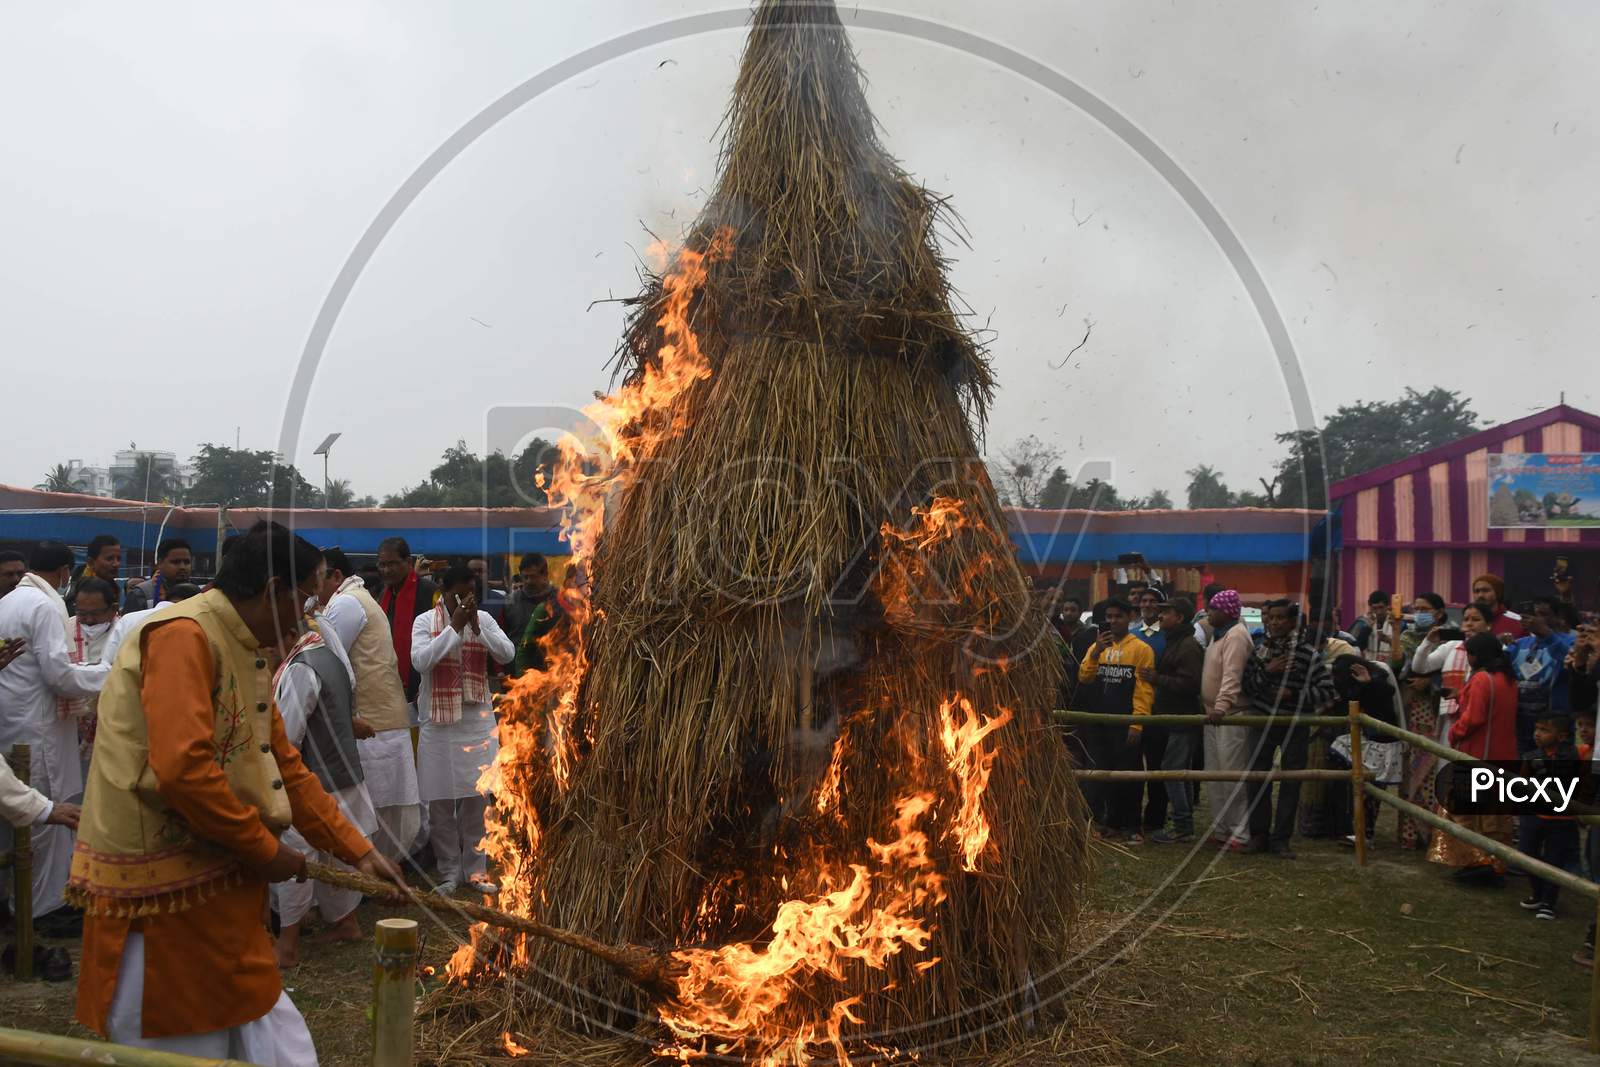 People burning a "Meji" which is made of bamboo and straw during "Bhogali Bihu" celebrations in Nagaon district of Assam on Jan 14,2021.